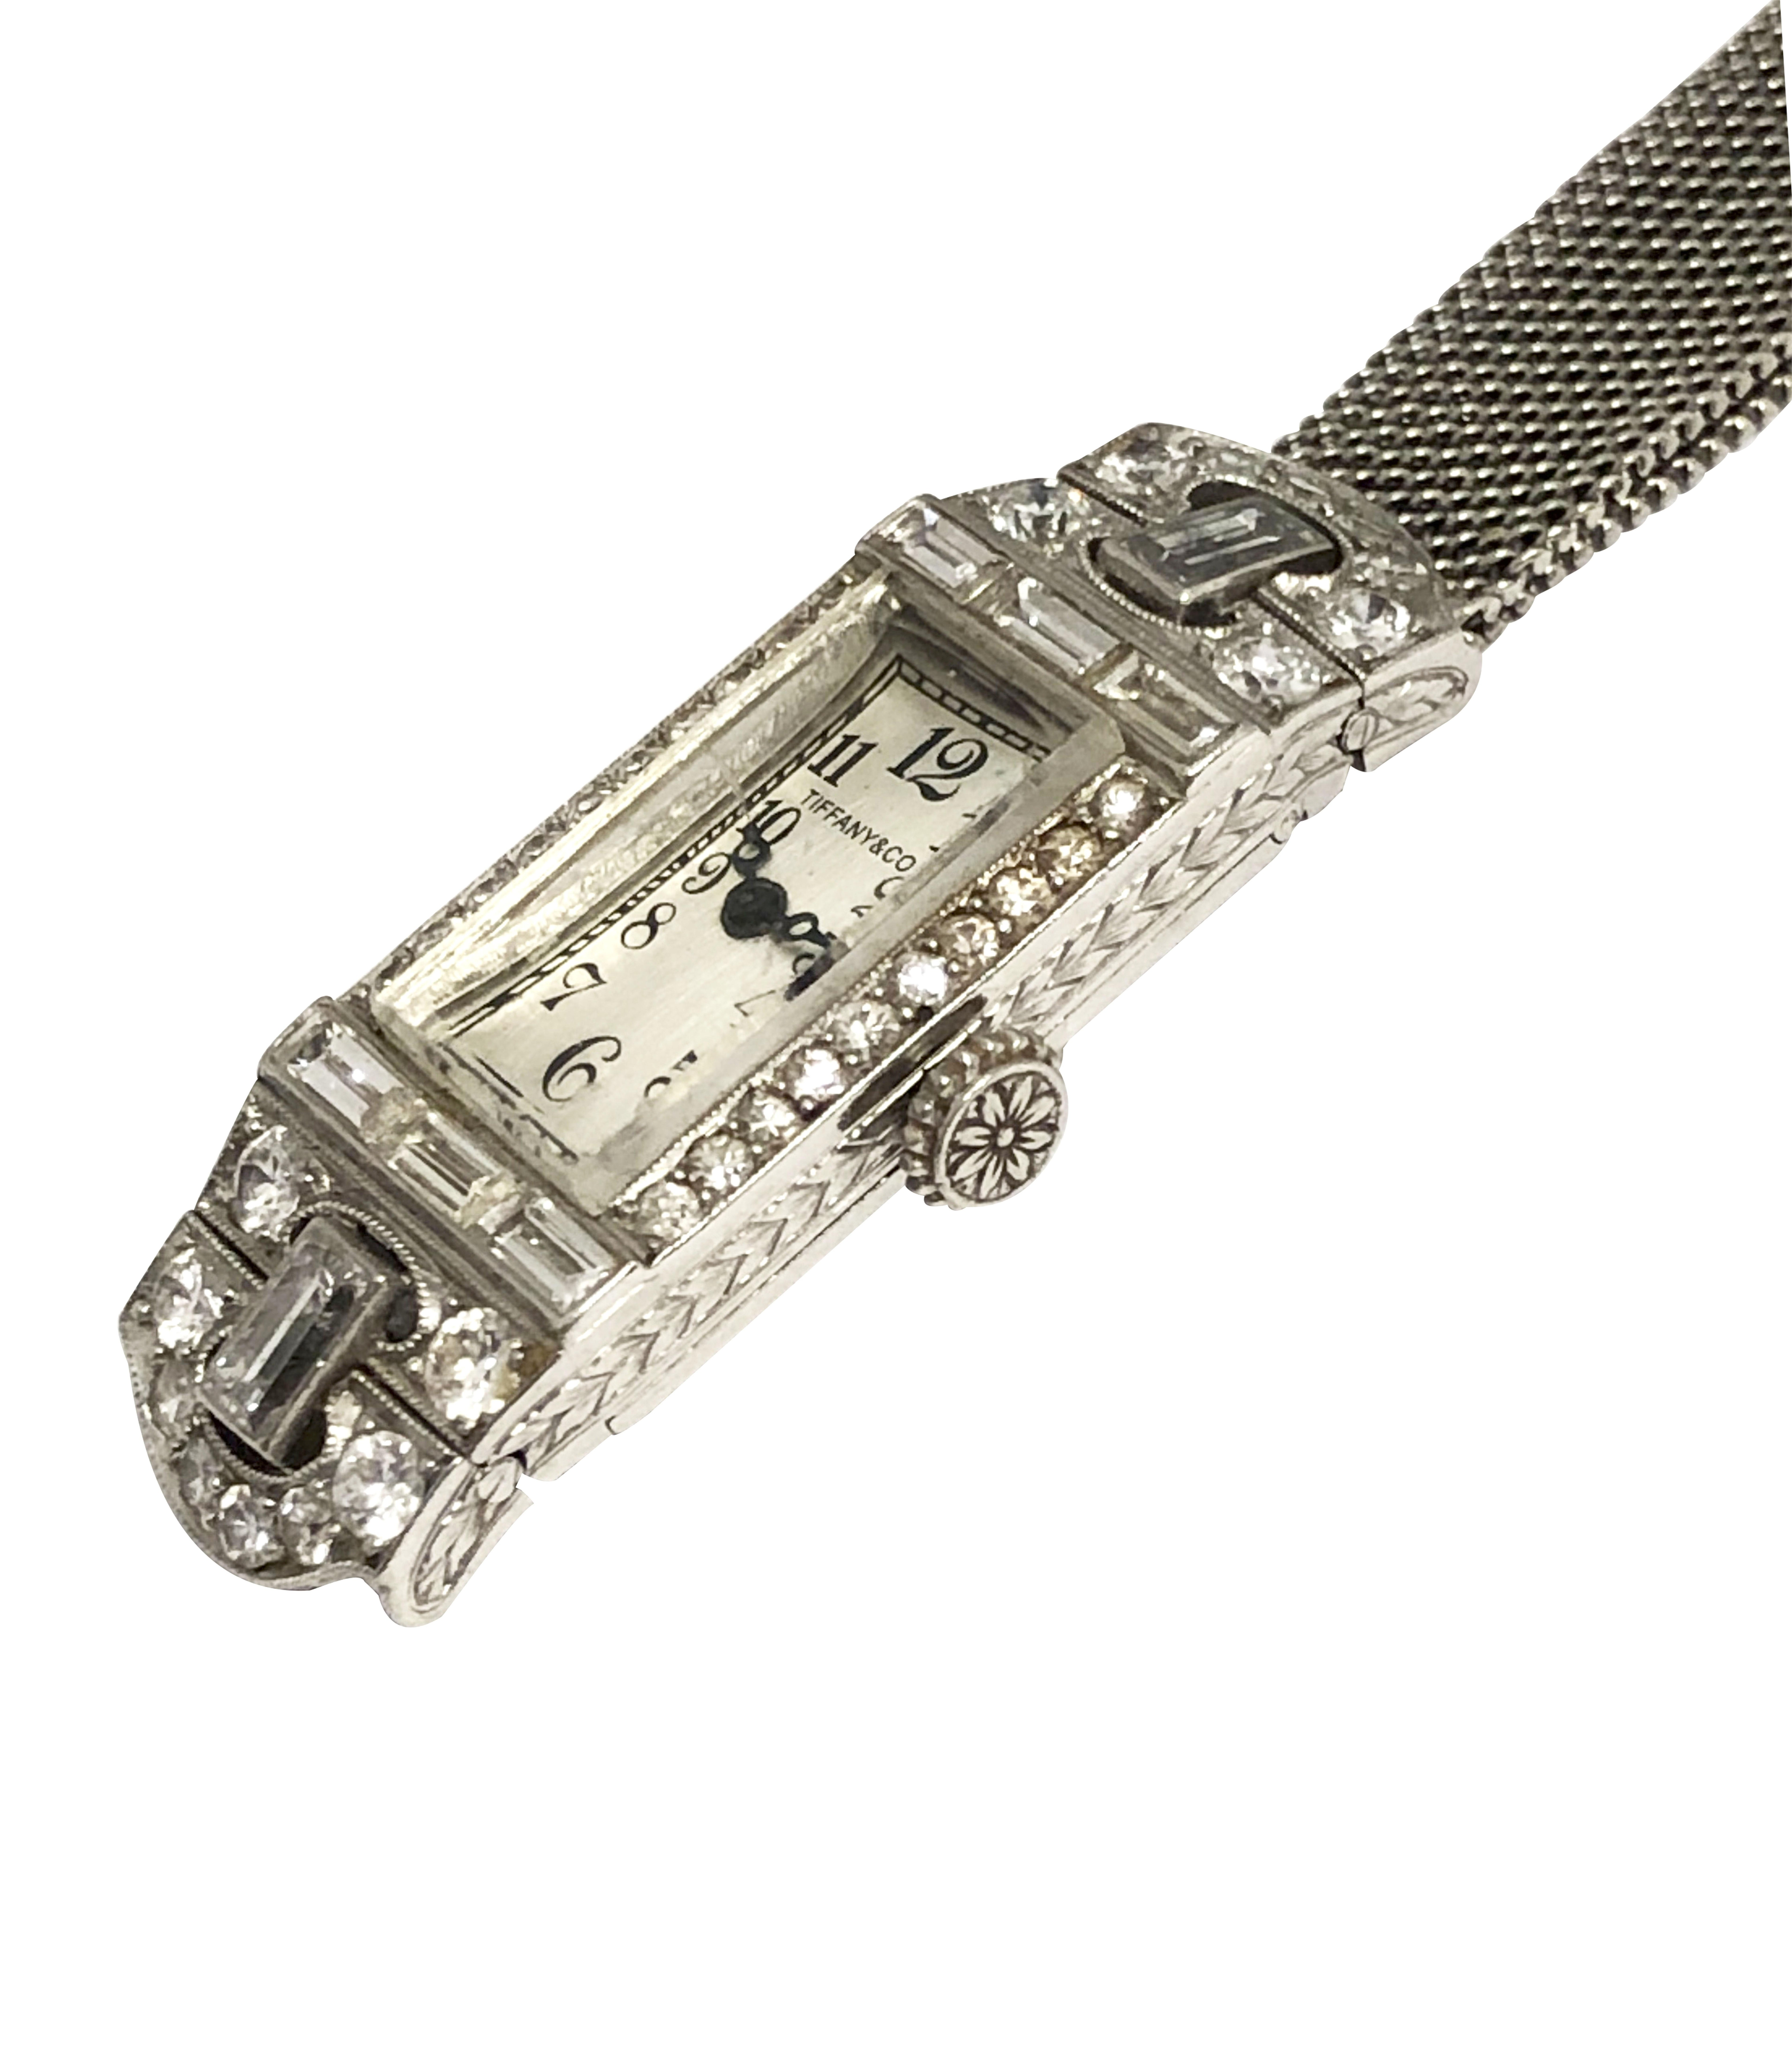 Circa 1920s Tiffany & Company Ladies Art Deco Wrist Watch, 1 1/2 X 1/2 inch Platinum hinge back contract case by Cress Arrow. Set with Old cut Round and Baguette Diamonds totaling 1 .10 Carats, further hand engraved design work on the case sides and